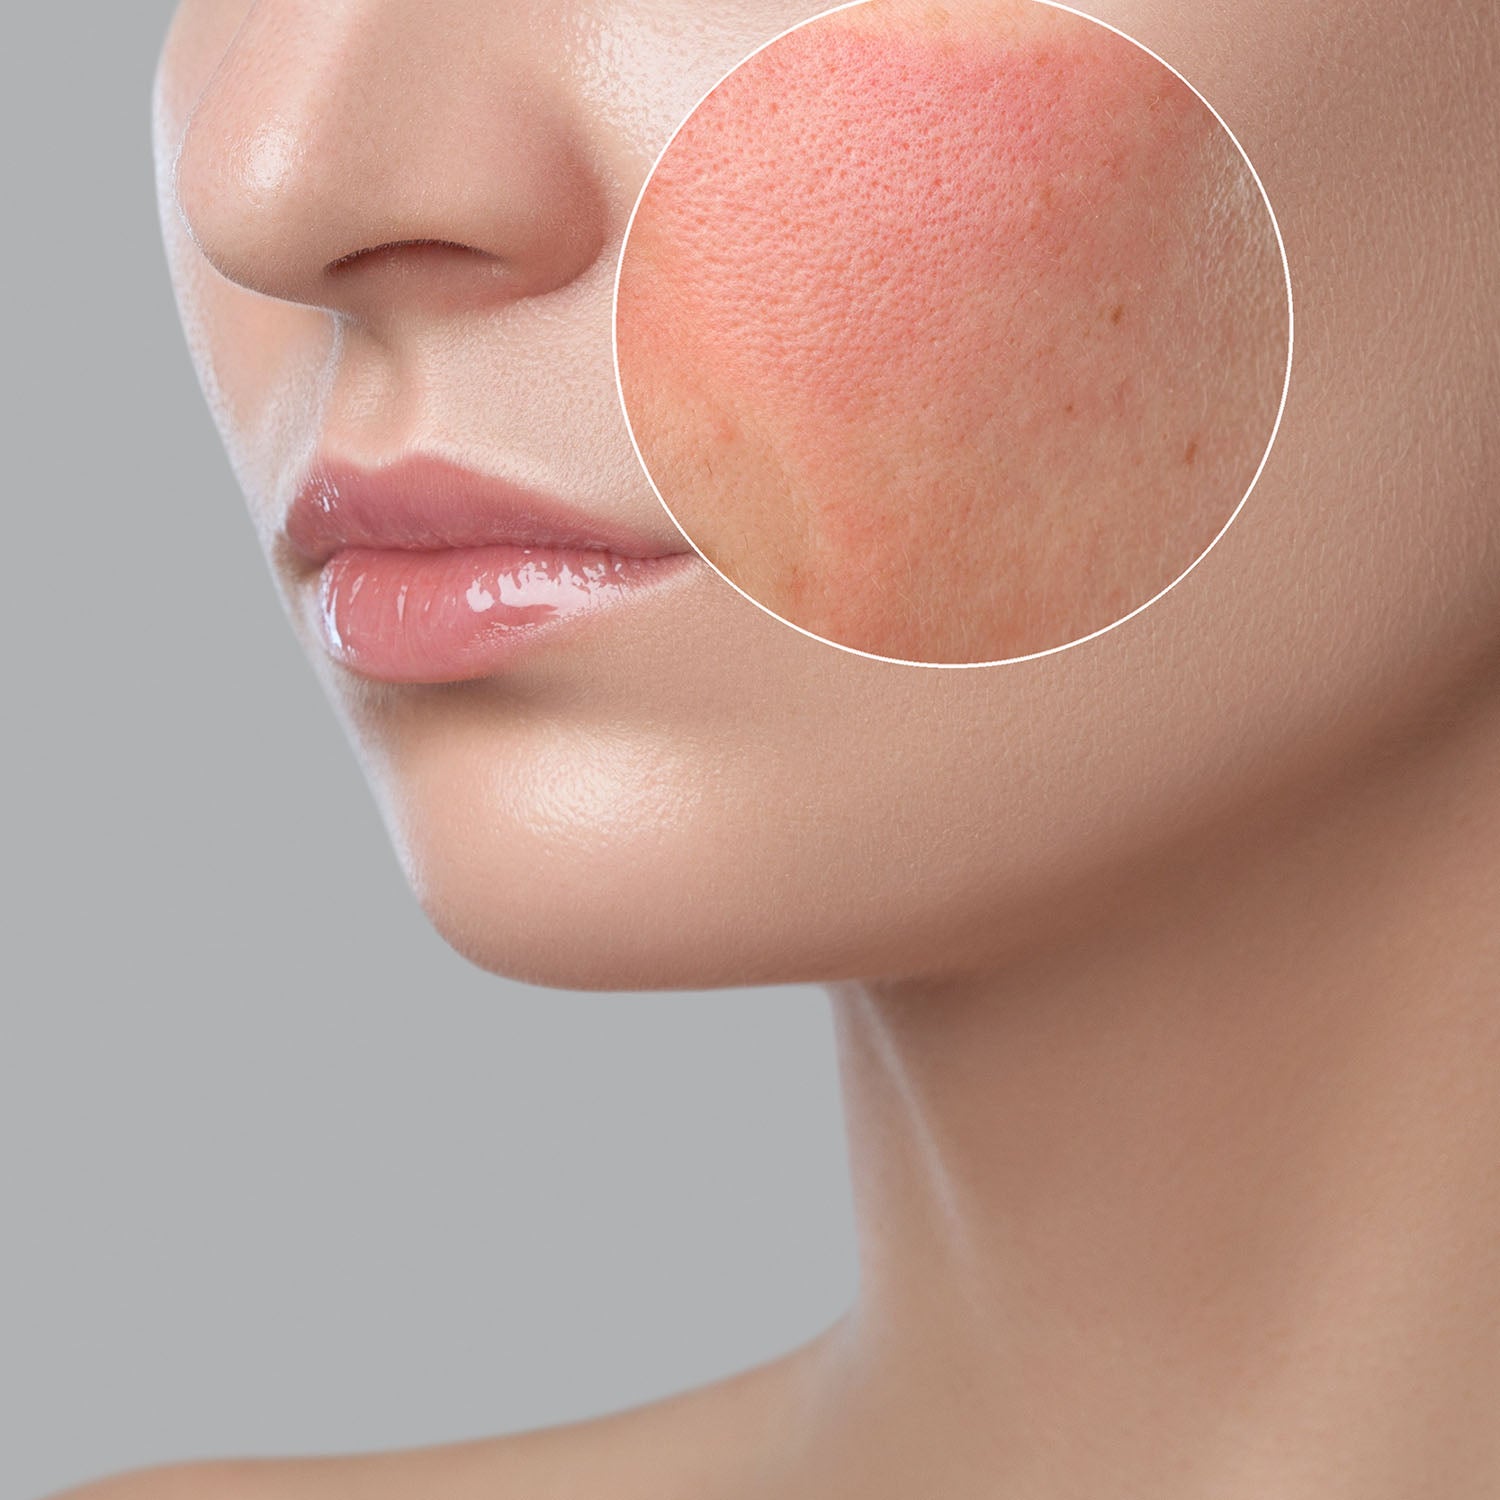 Illustration of redness and irritation on a women's face